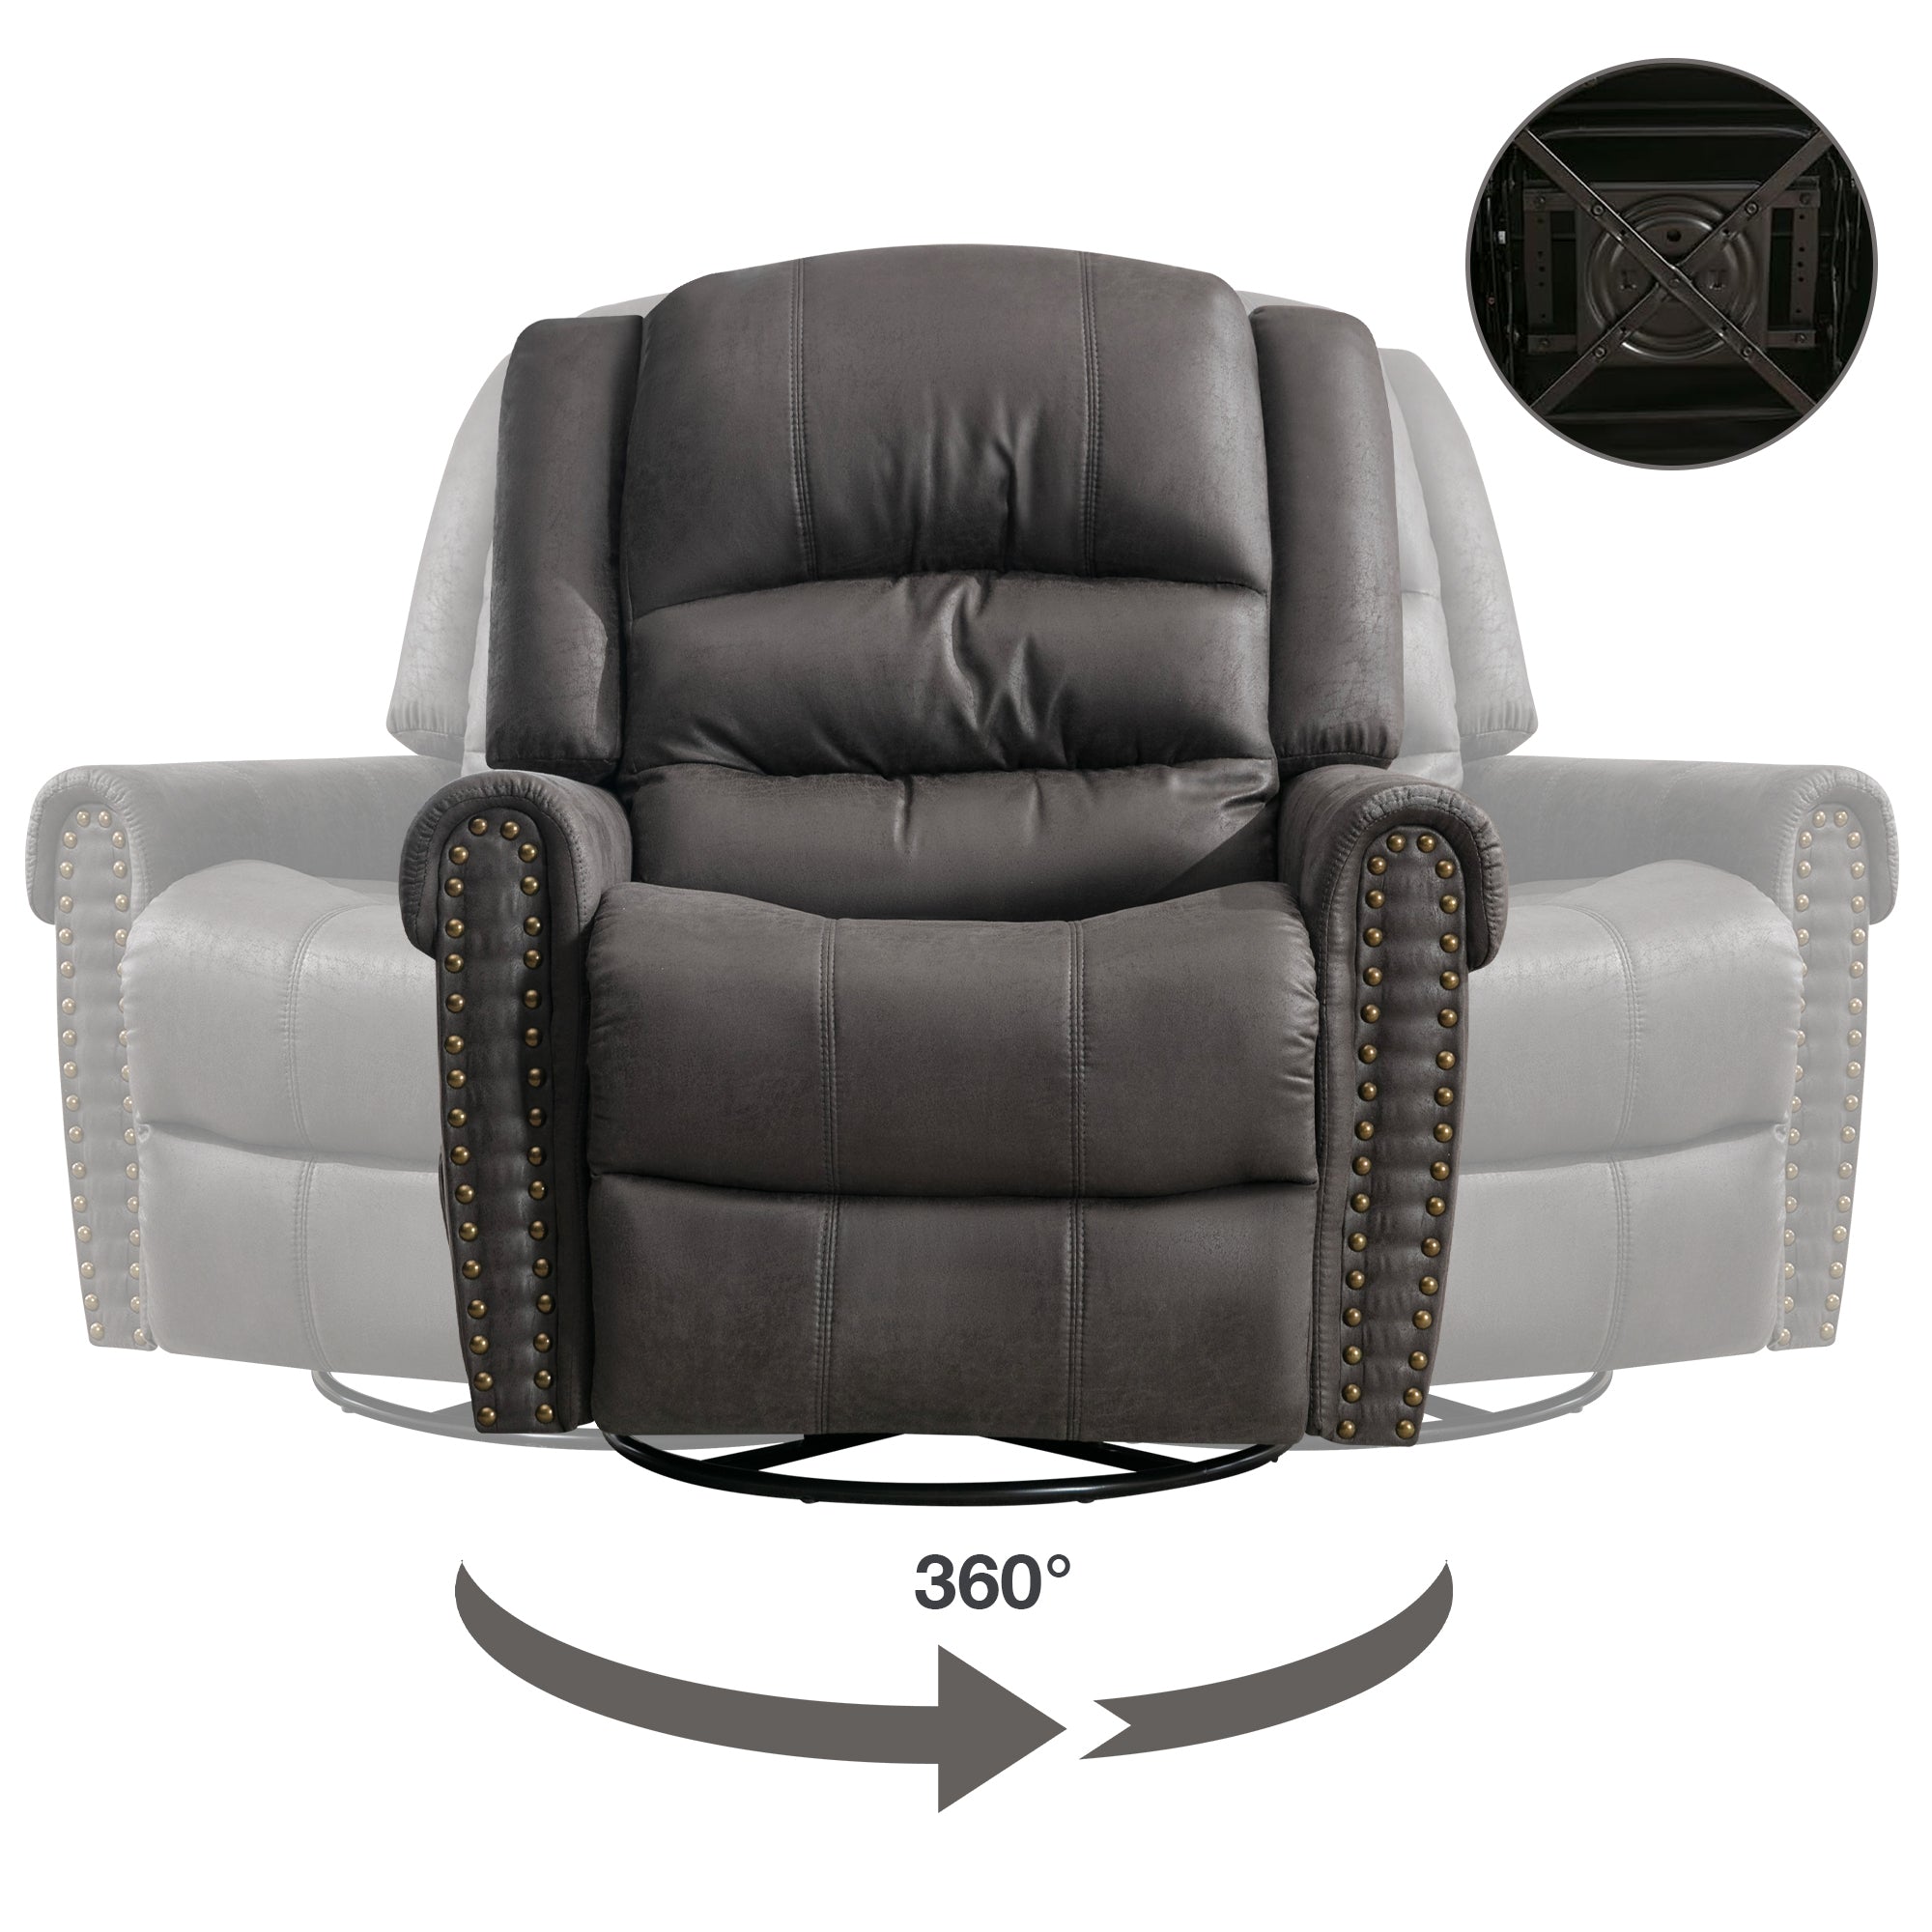 Liam Oversized Manual Pull Swivel Rocker Recliner With Vibrate Massage heat and USB Charge Port